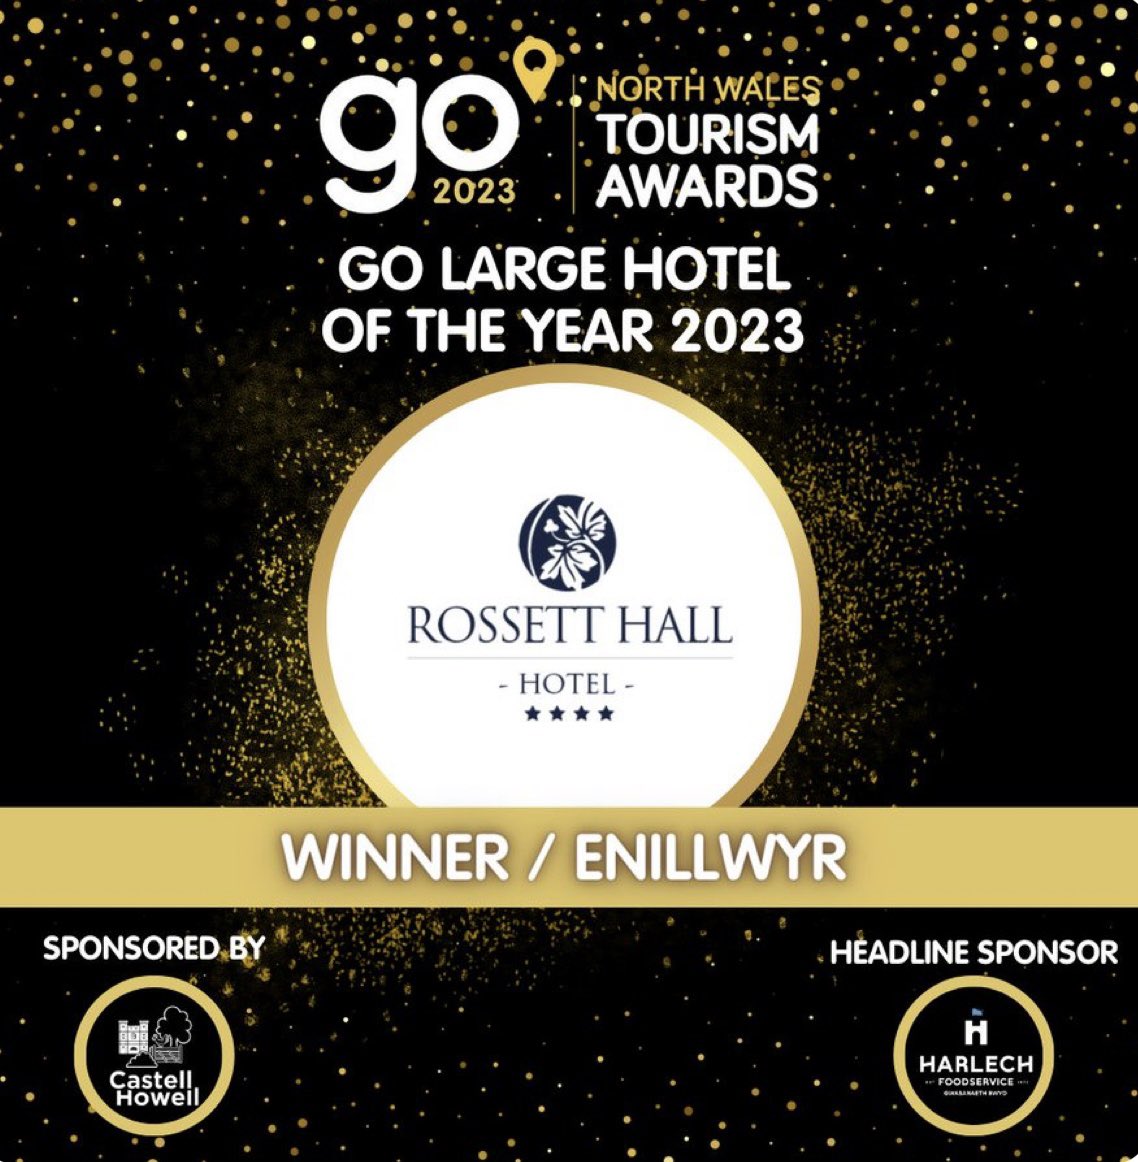 We won!!! We are the proud winners of ‘Go Large Hotel of the Year Award!’ 🥂

ever.dbm.guestline.net/availability?h…

@GoNorthWales @castellhowell @harlechfoods 

#NorthWalesTourism #NWTAwards #TourismAwards #Winners #GoNWTAwards